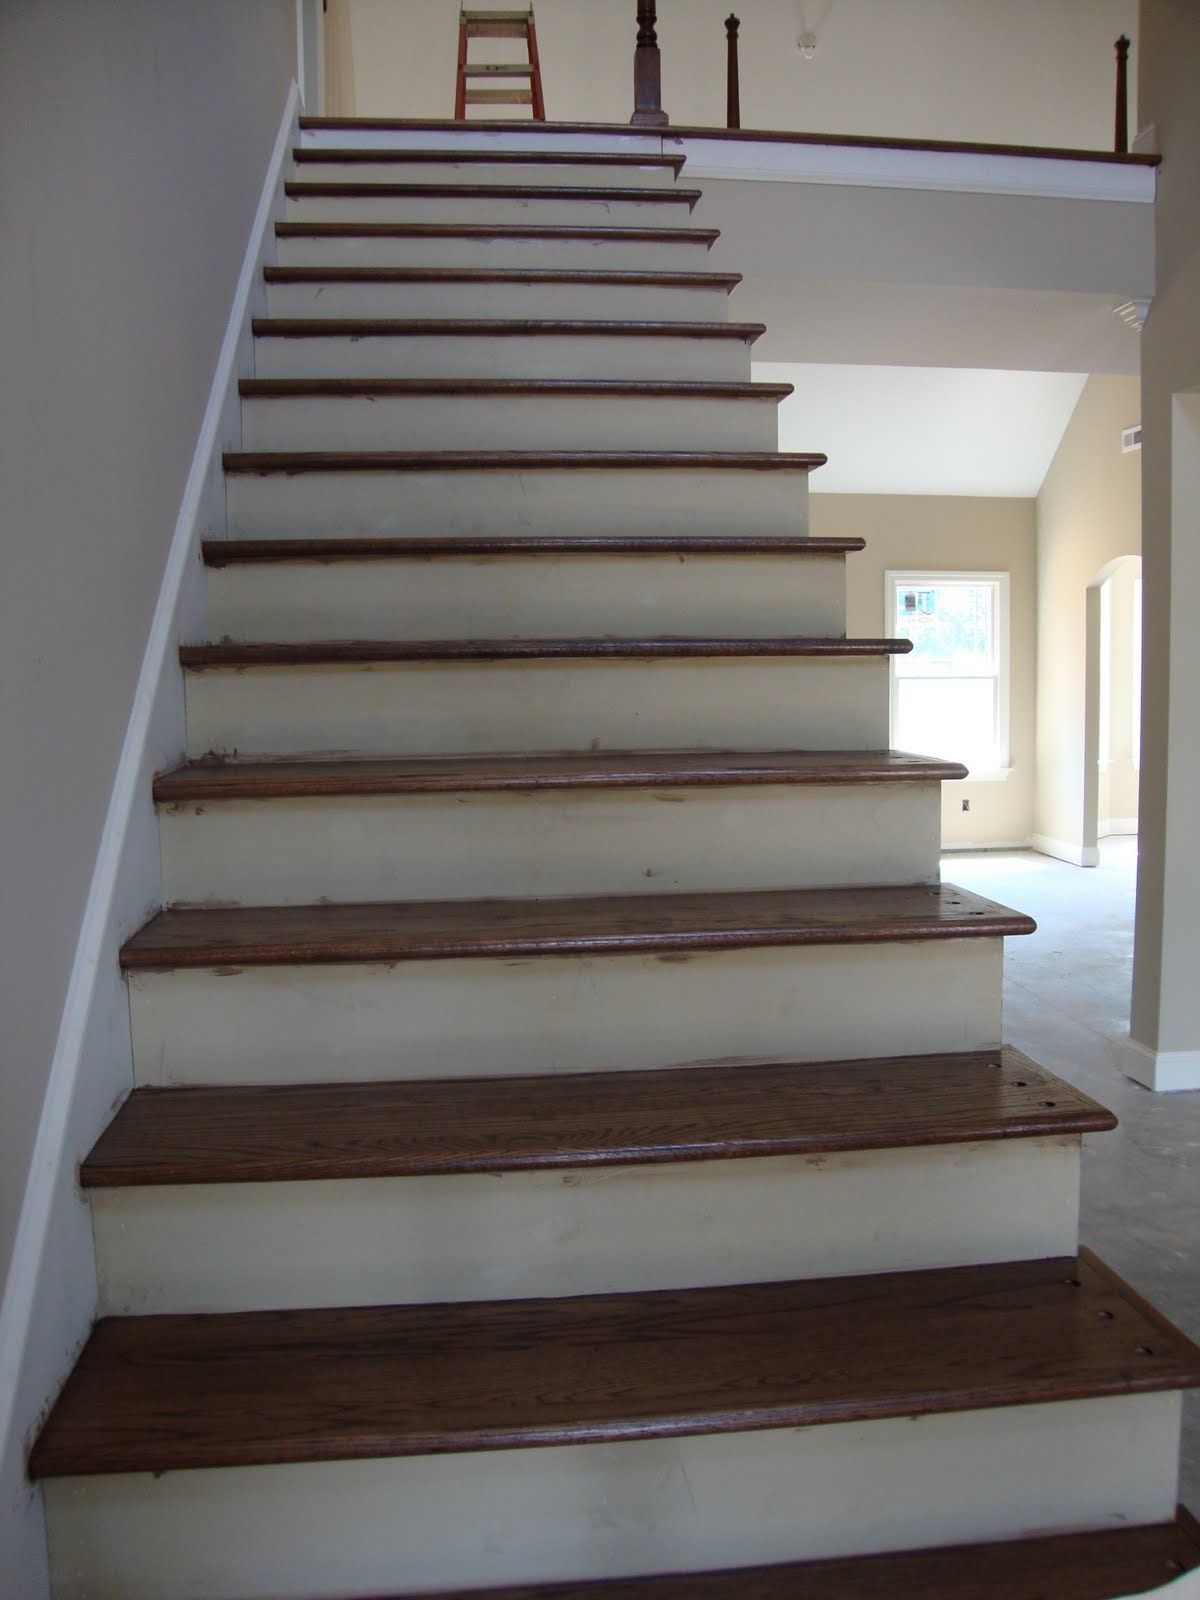 Style Of Vinyl Stair Treads And Risers Vinyl Stair Treads And Pertaining To Decorative Indoor Stair Treads (View 10 of 20)